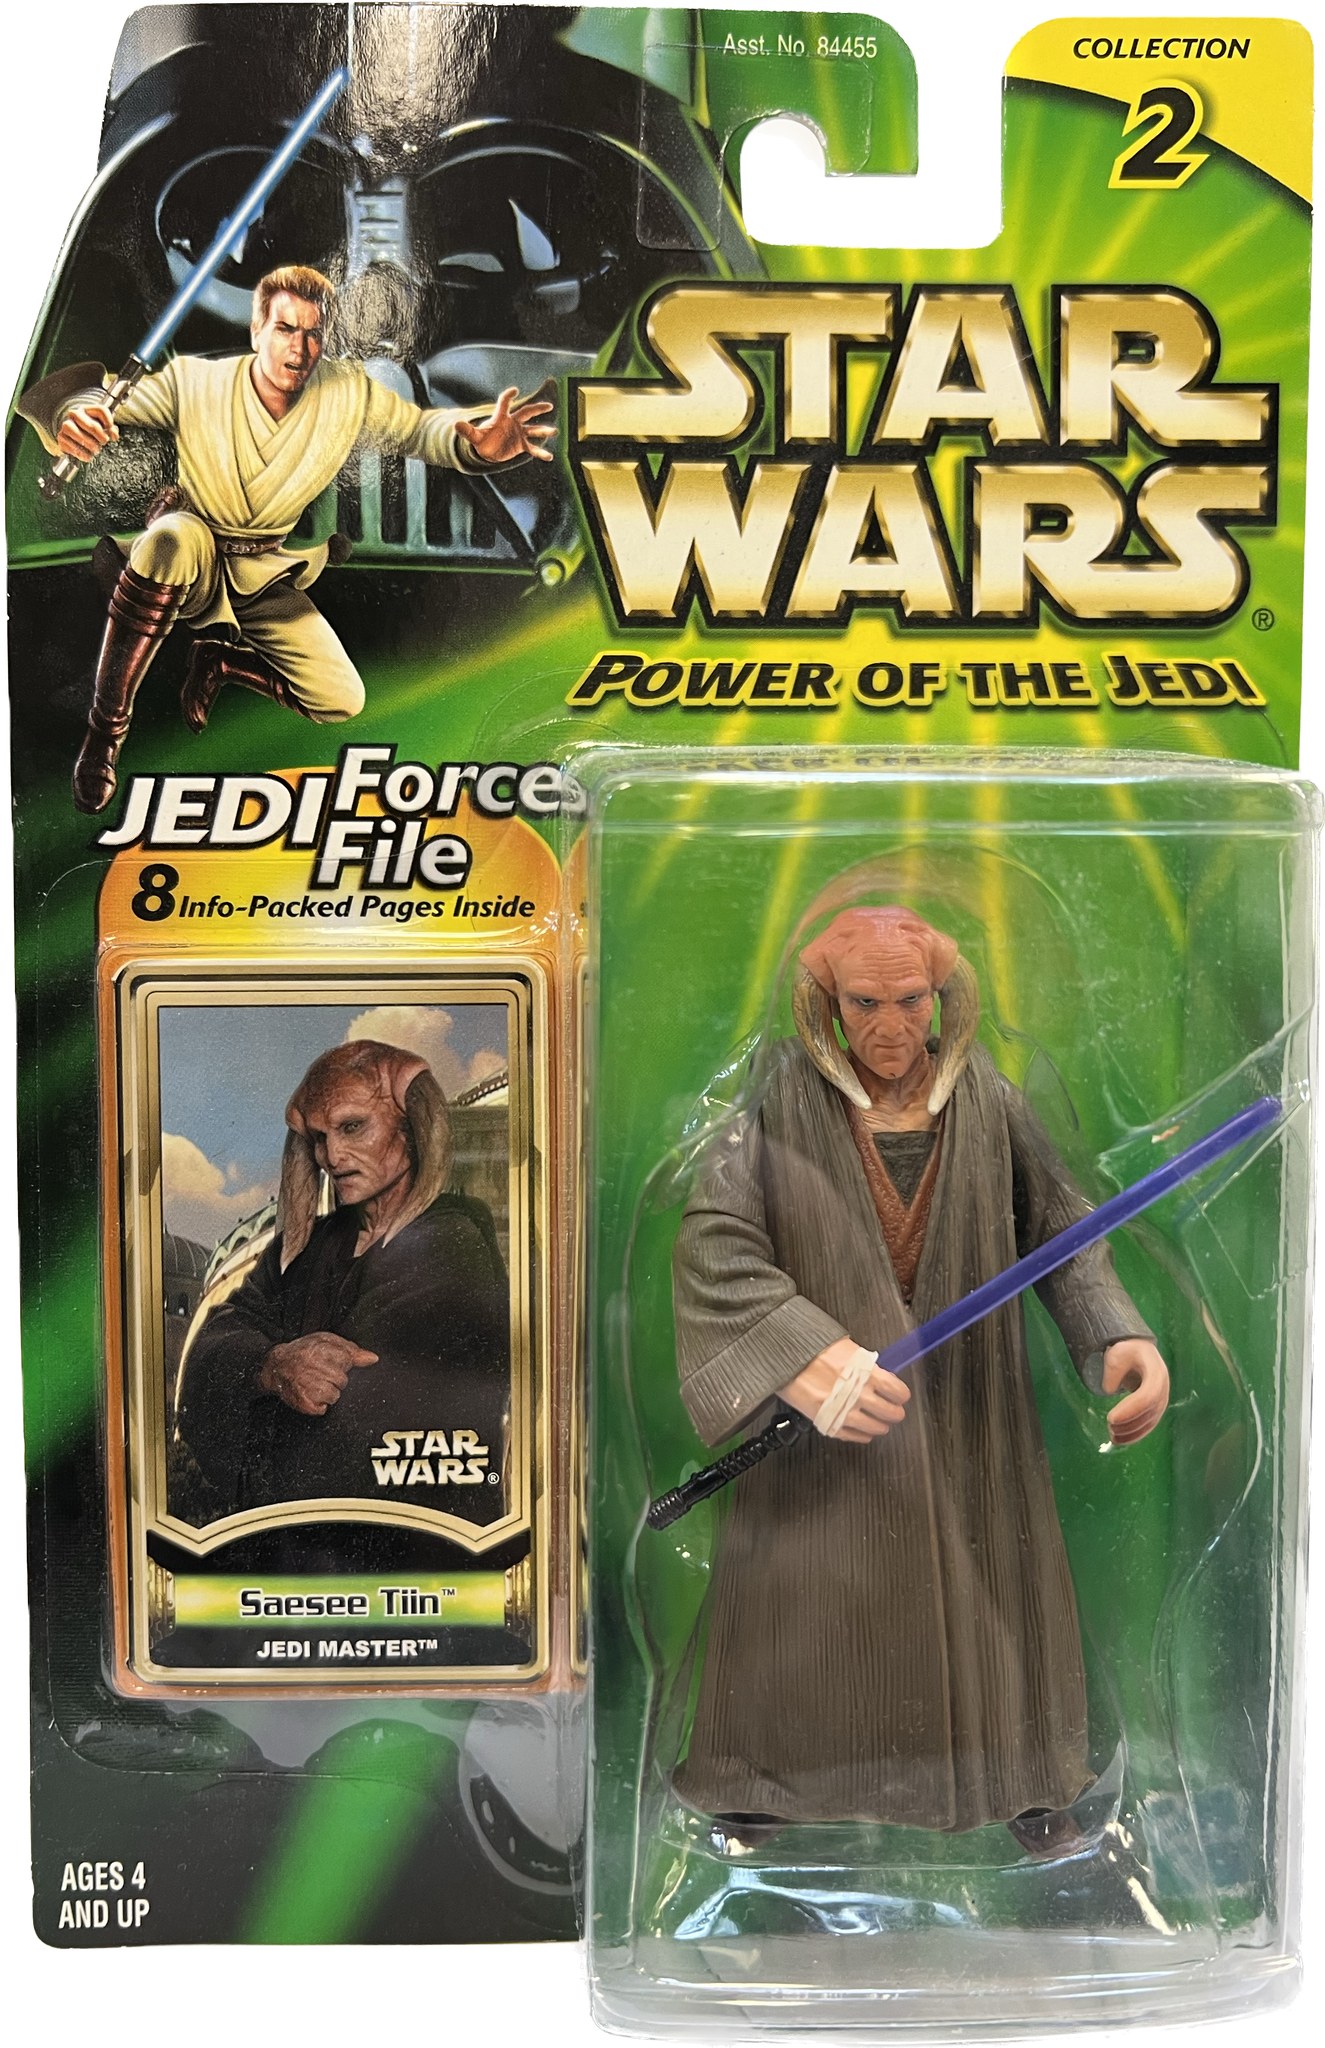 Star Wars Power of the Jedi Saesee Tiin